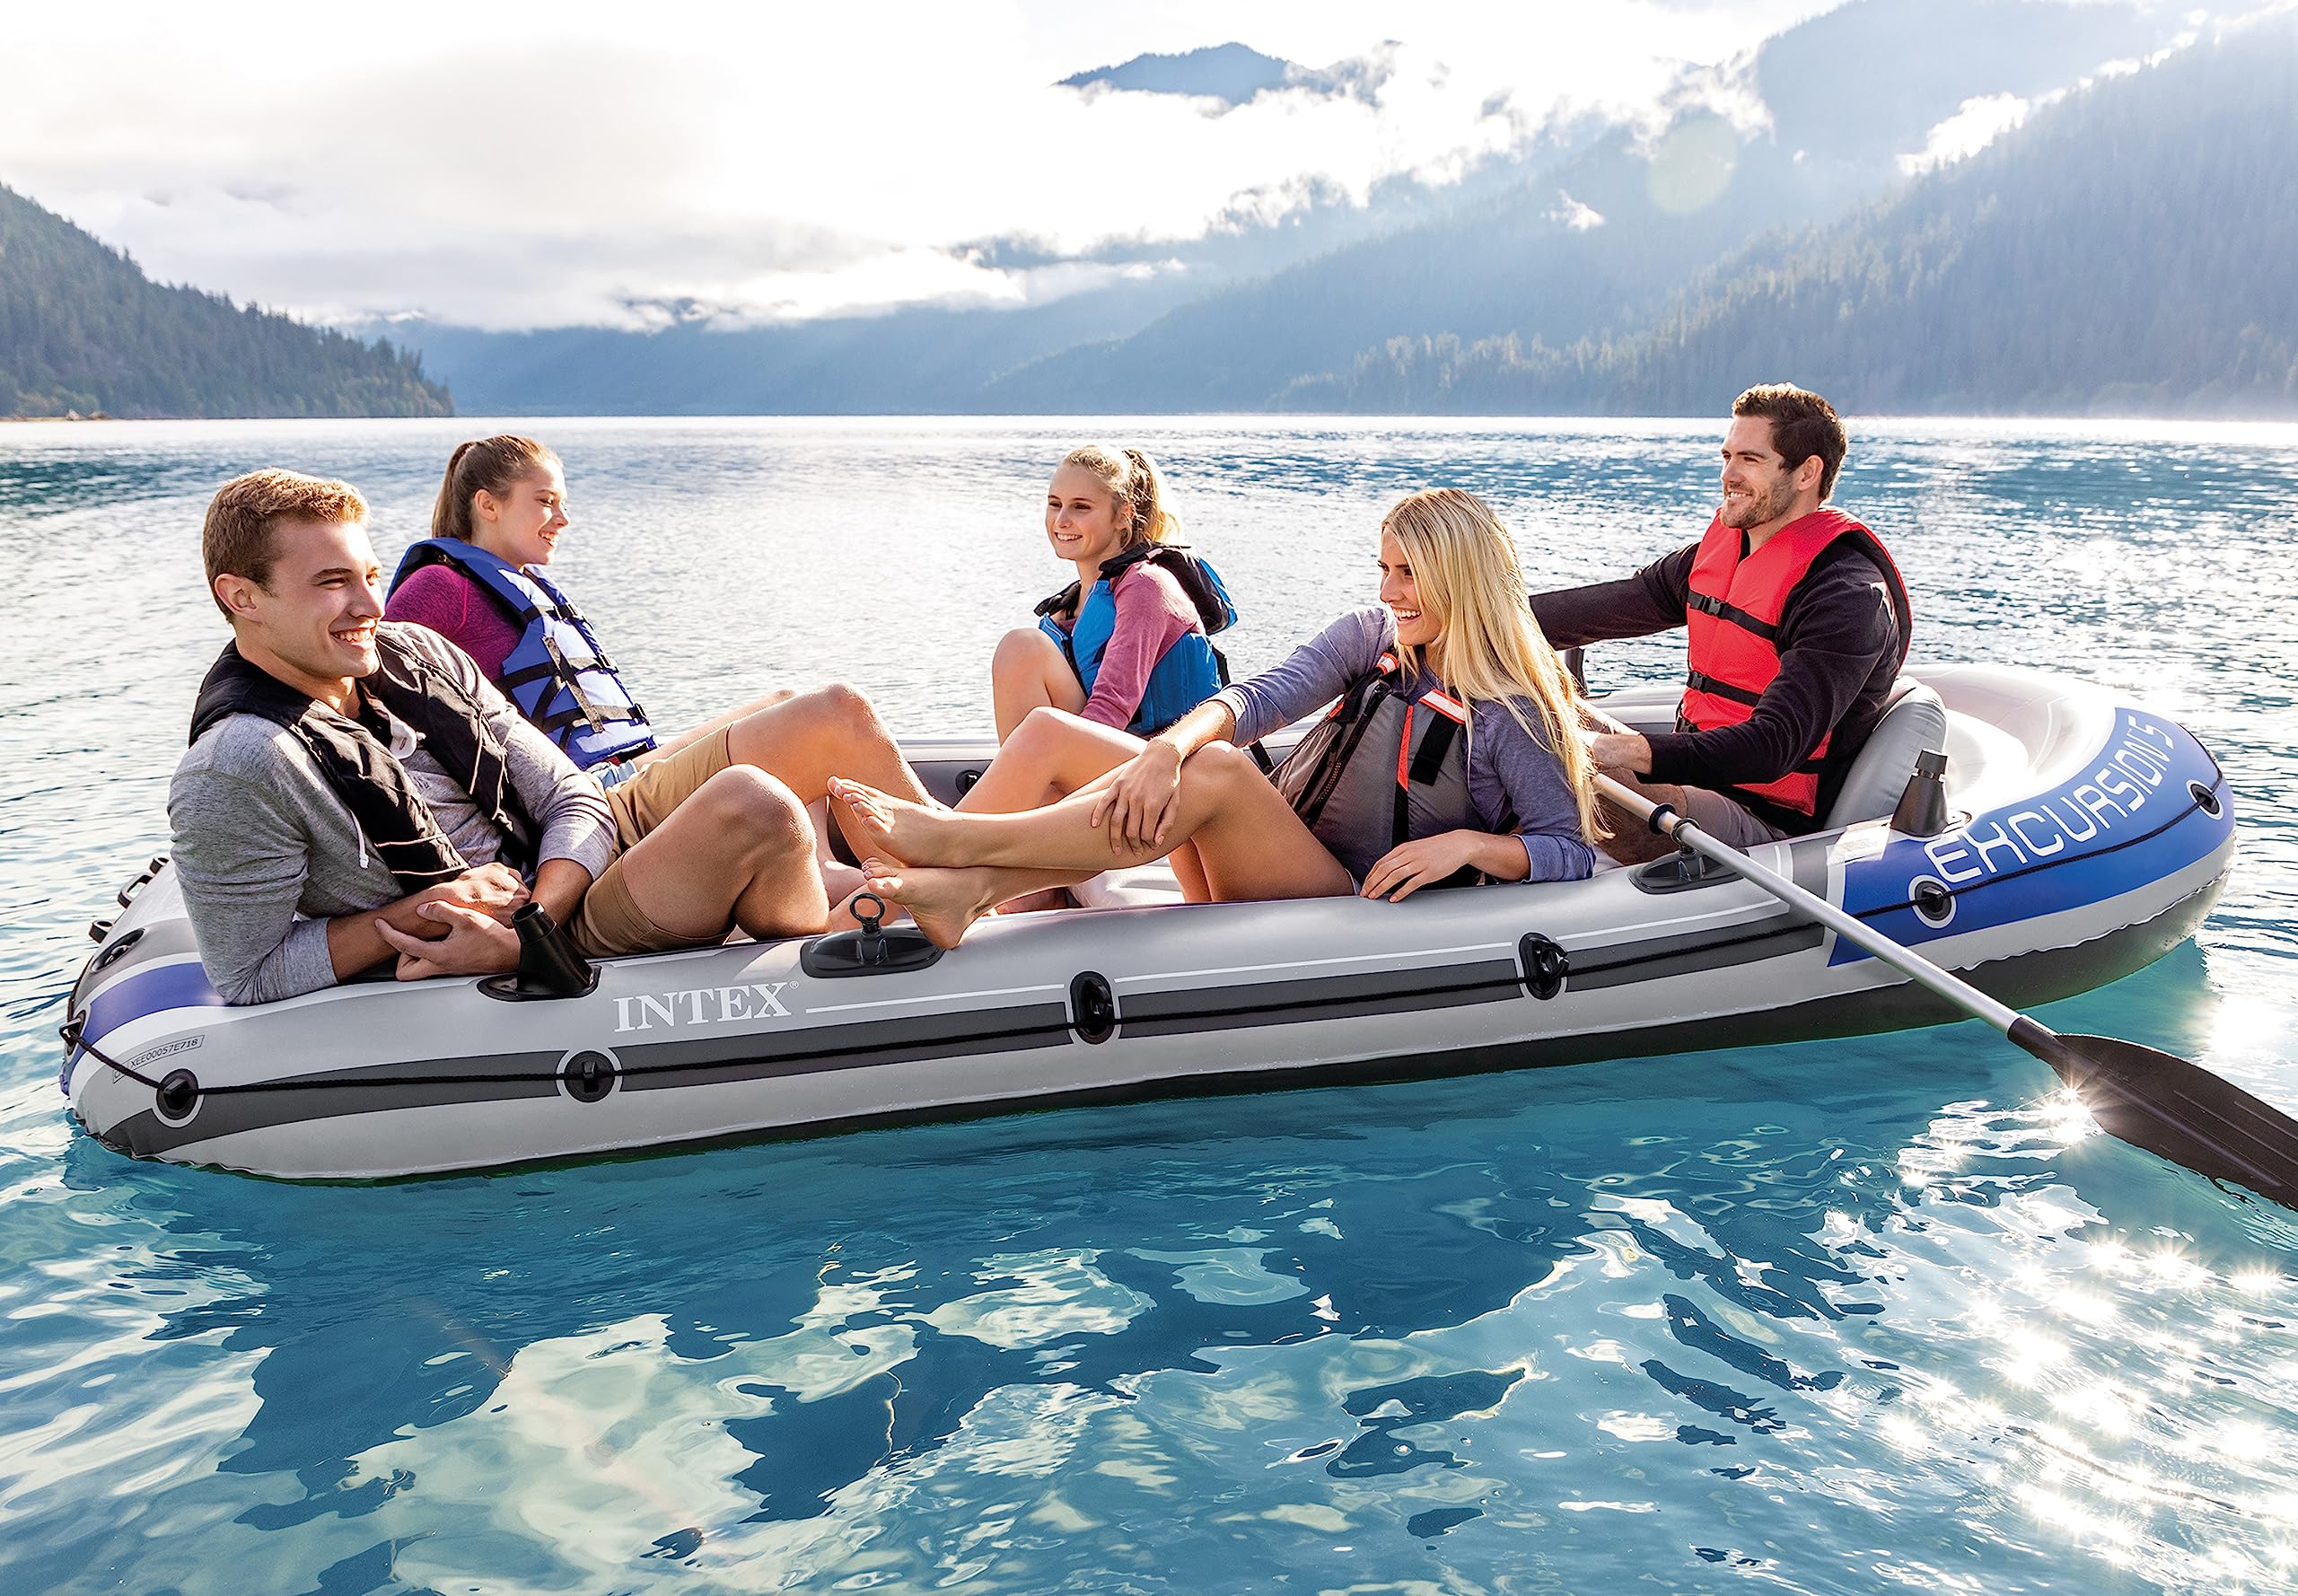 INTEX Excursion Inflatable Boat Series: Includes Deluxe 54in Aluminum Oars and High-Output Pump – SuperStrong PVC – Adjustable Seats with Backrest – Fishing Rod Holders – Welded Oar Locks